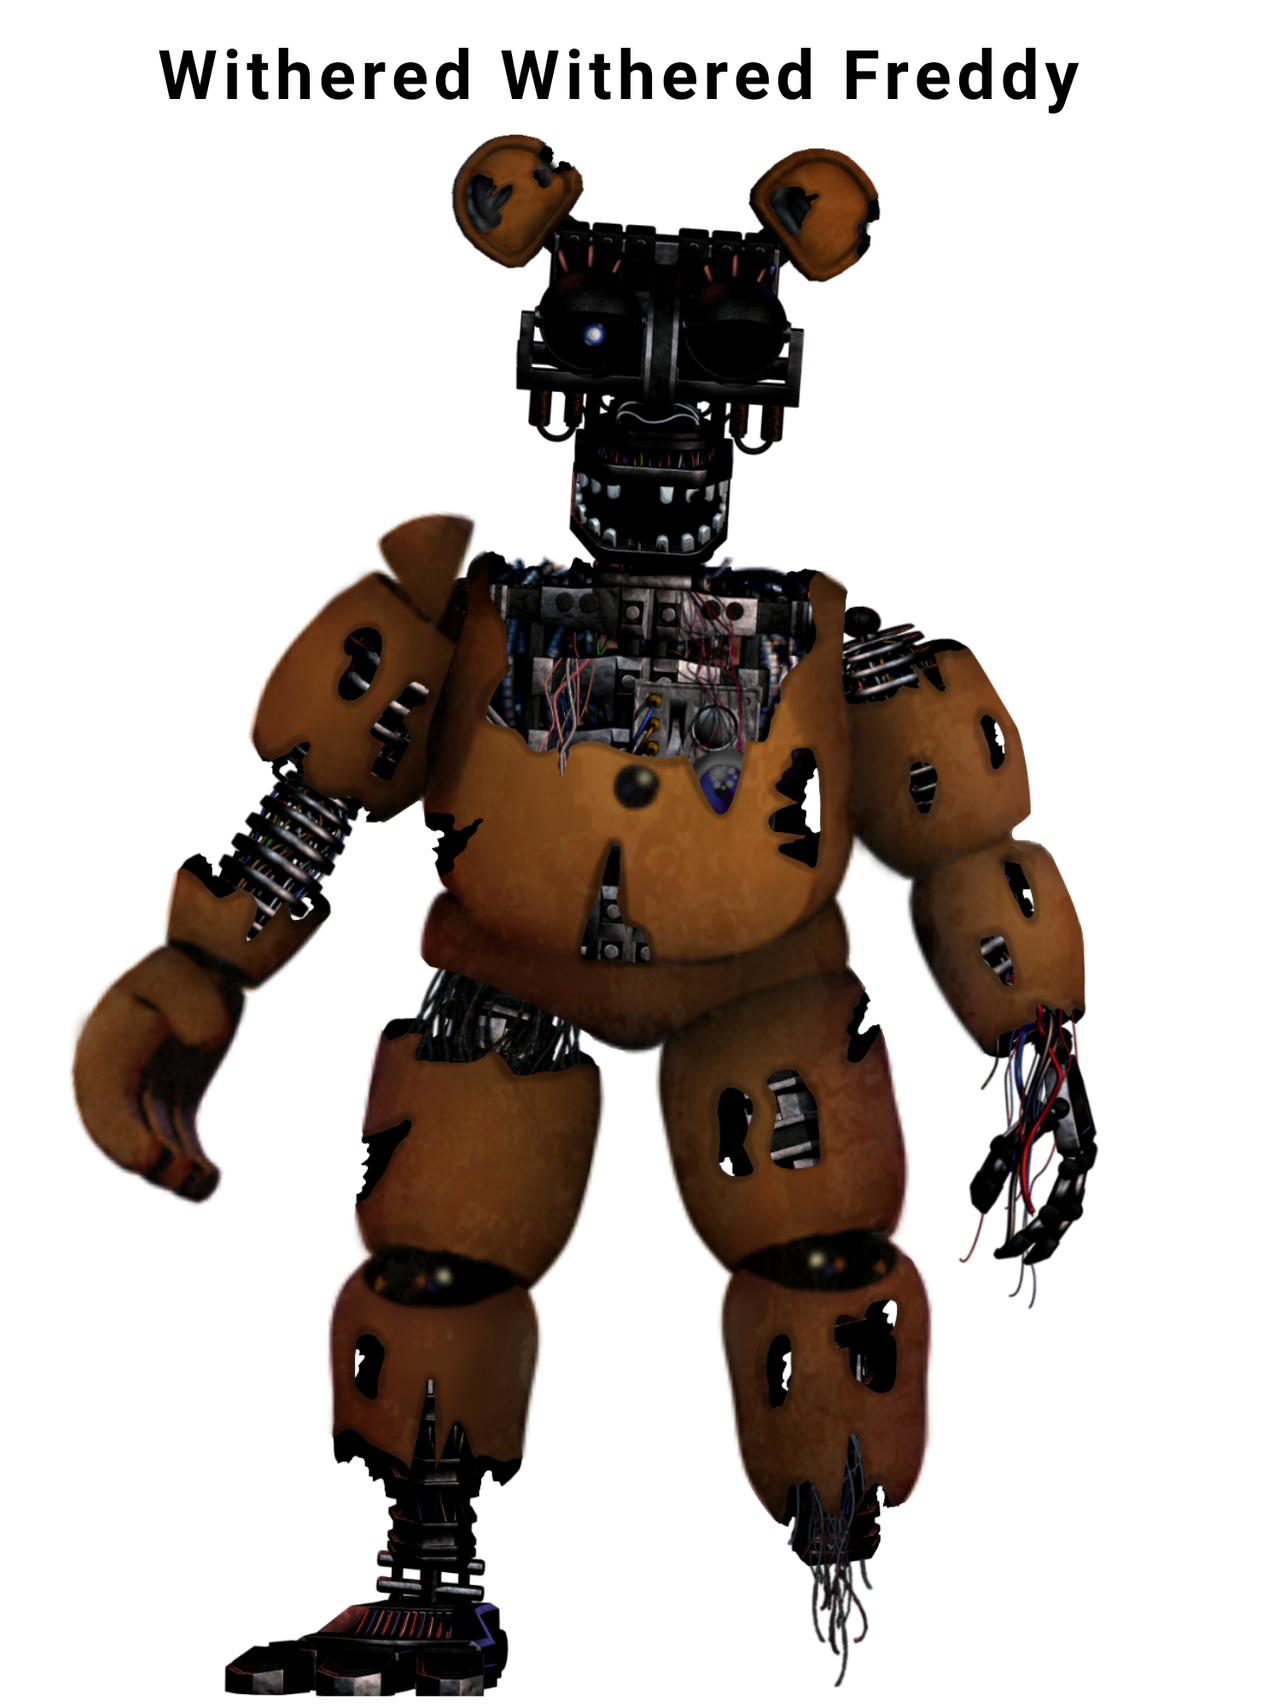 Withered Freddy😎 (@withered.freddy28)